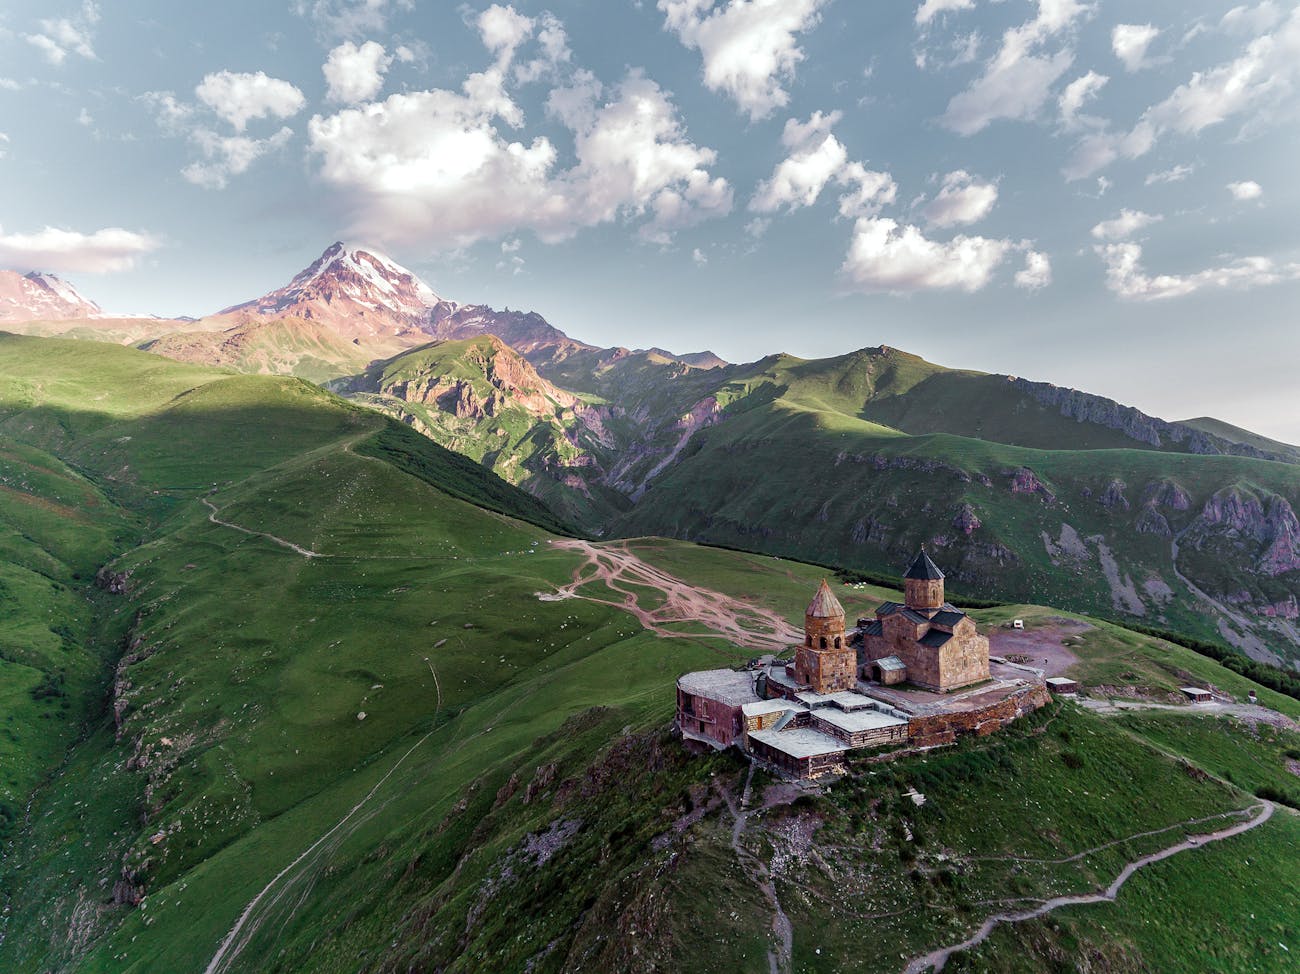 A remote hilltop monastery surrounded by gorges and mountains